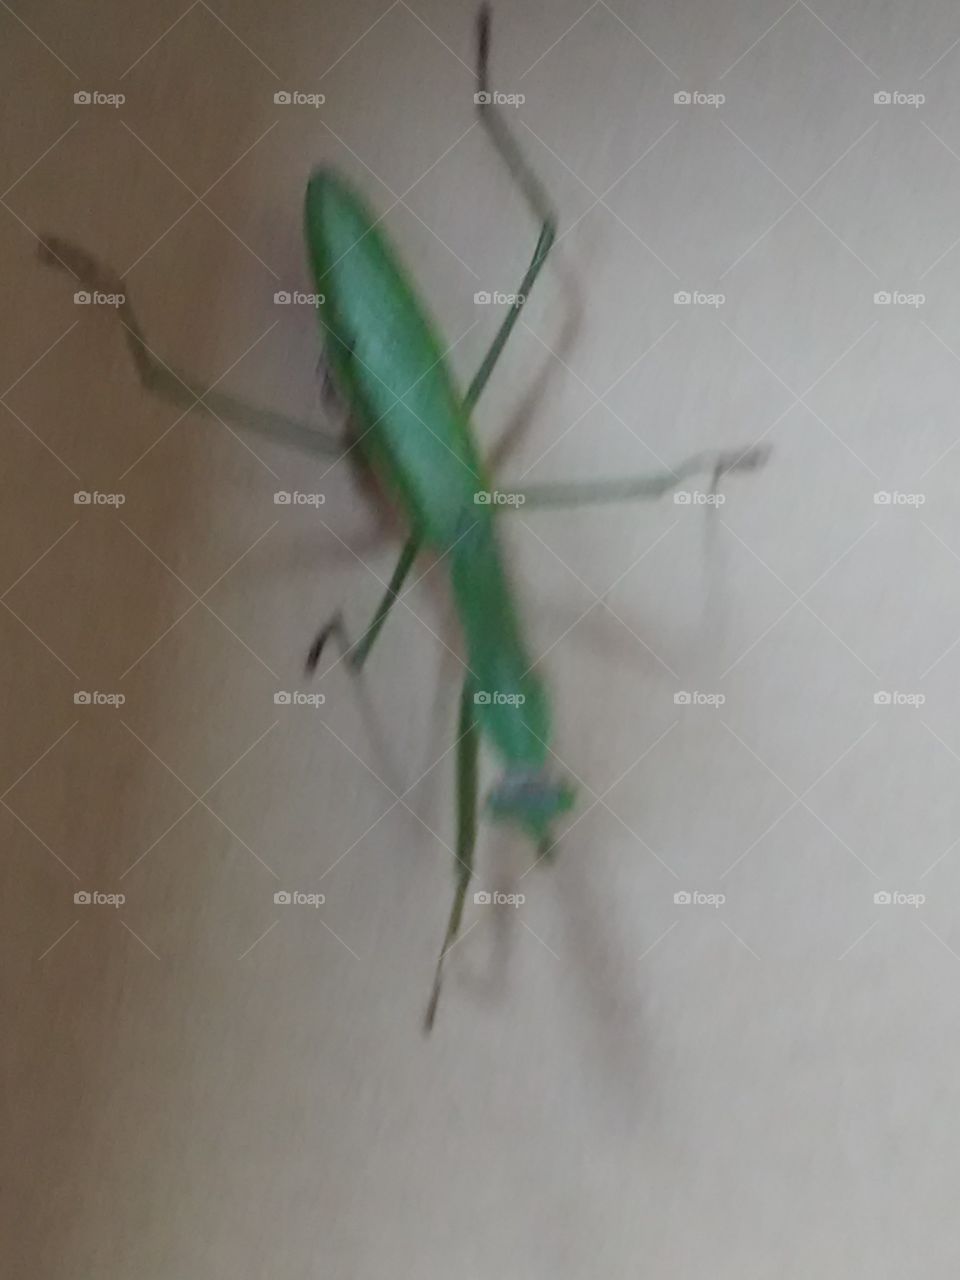 The Bug of all bug's. praying mantis and I have been trying to get one all year.